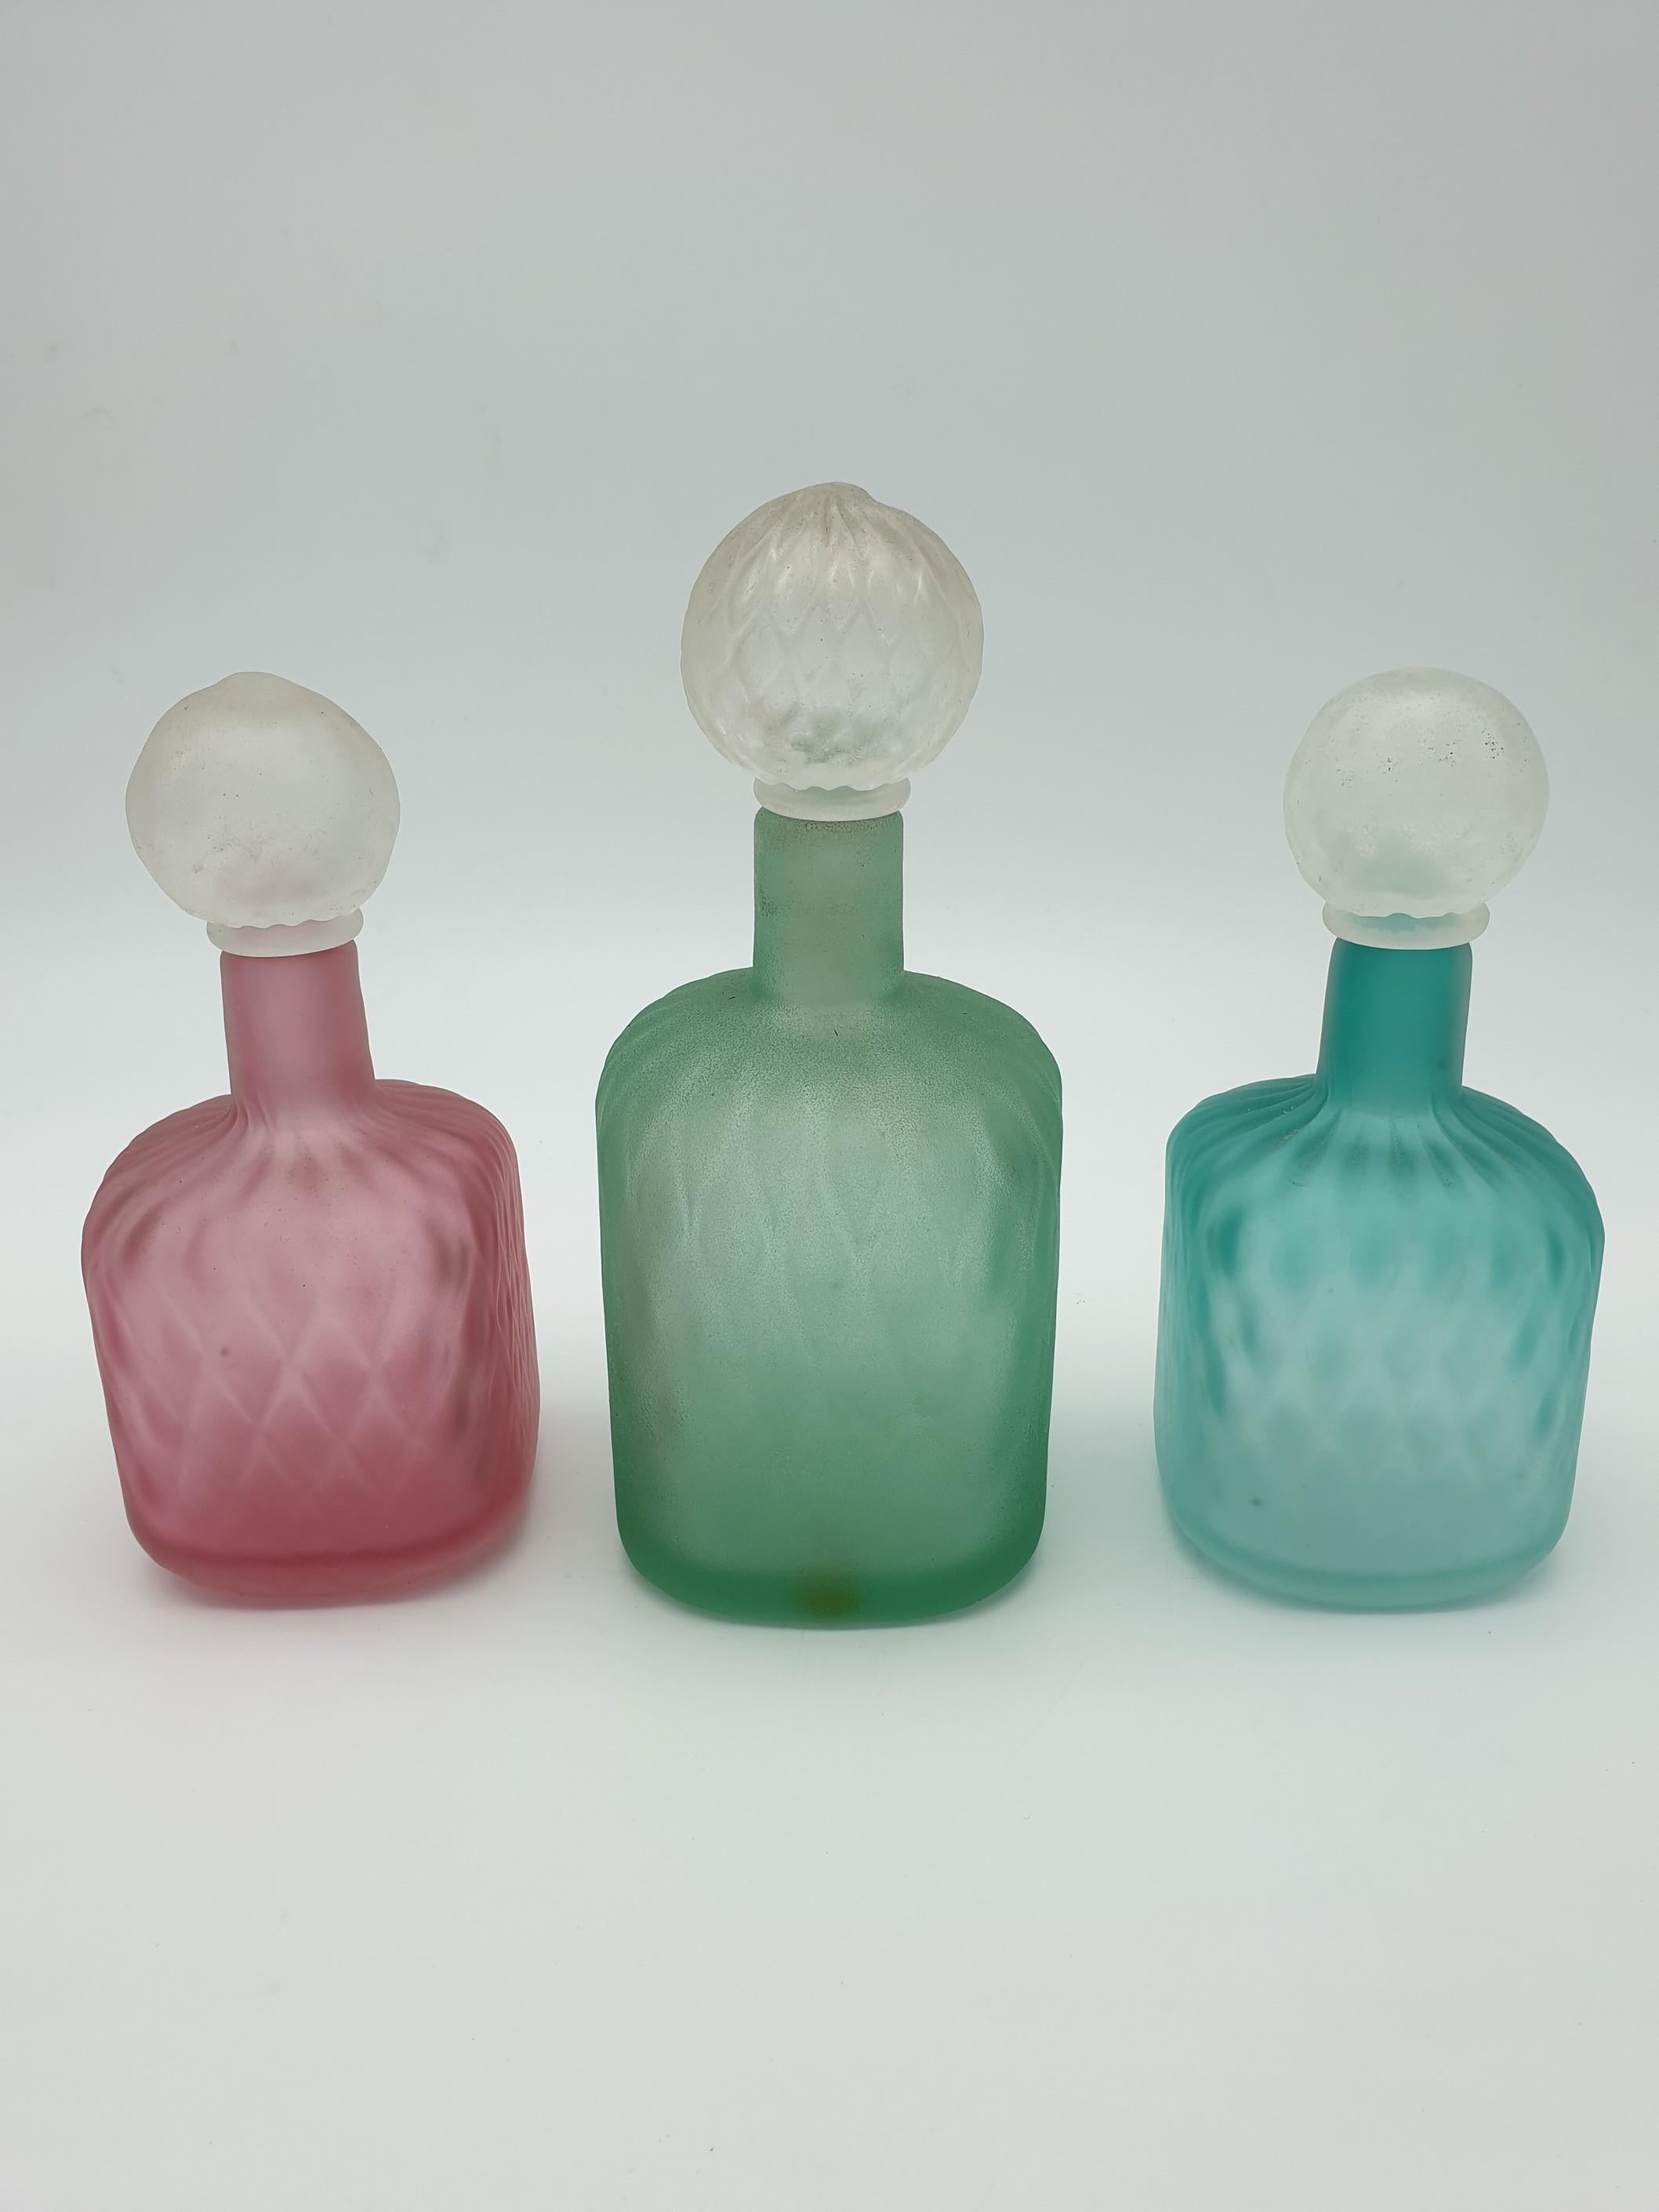 Set of three modern Murano glass jugs, completely hand-made and blown by Gino Cenedese e Figlio glass factory in the mid-1980s. This colorful set is made of three square cross-section jugs in different sizes: a larger green jug and two medium sized